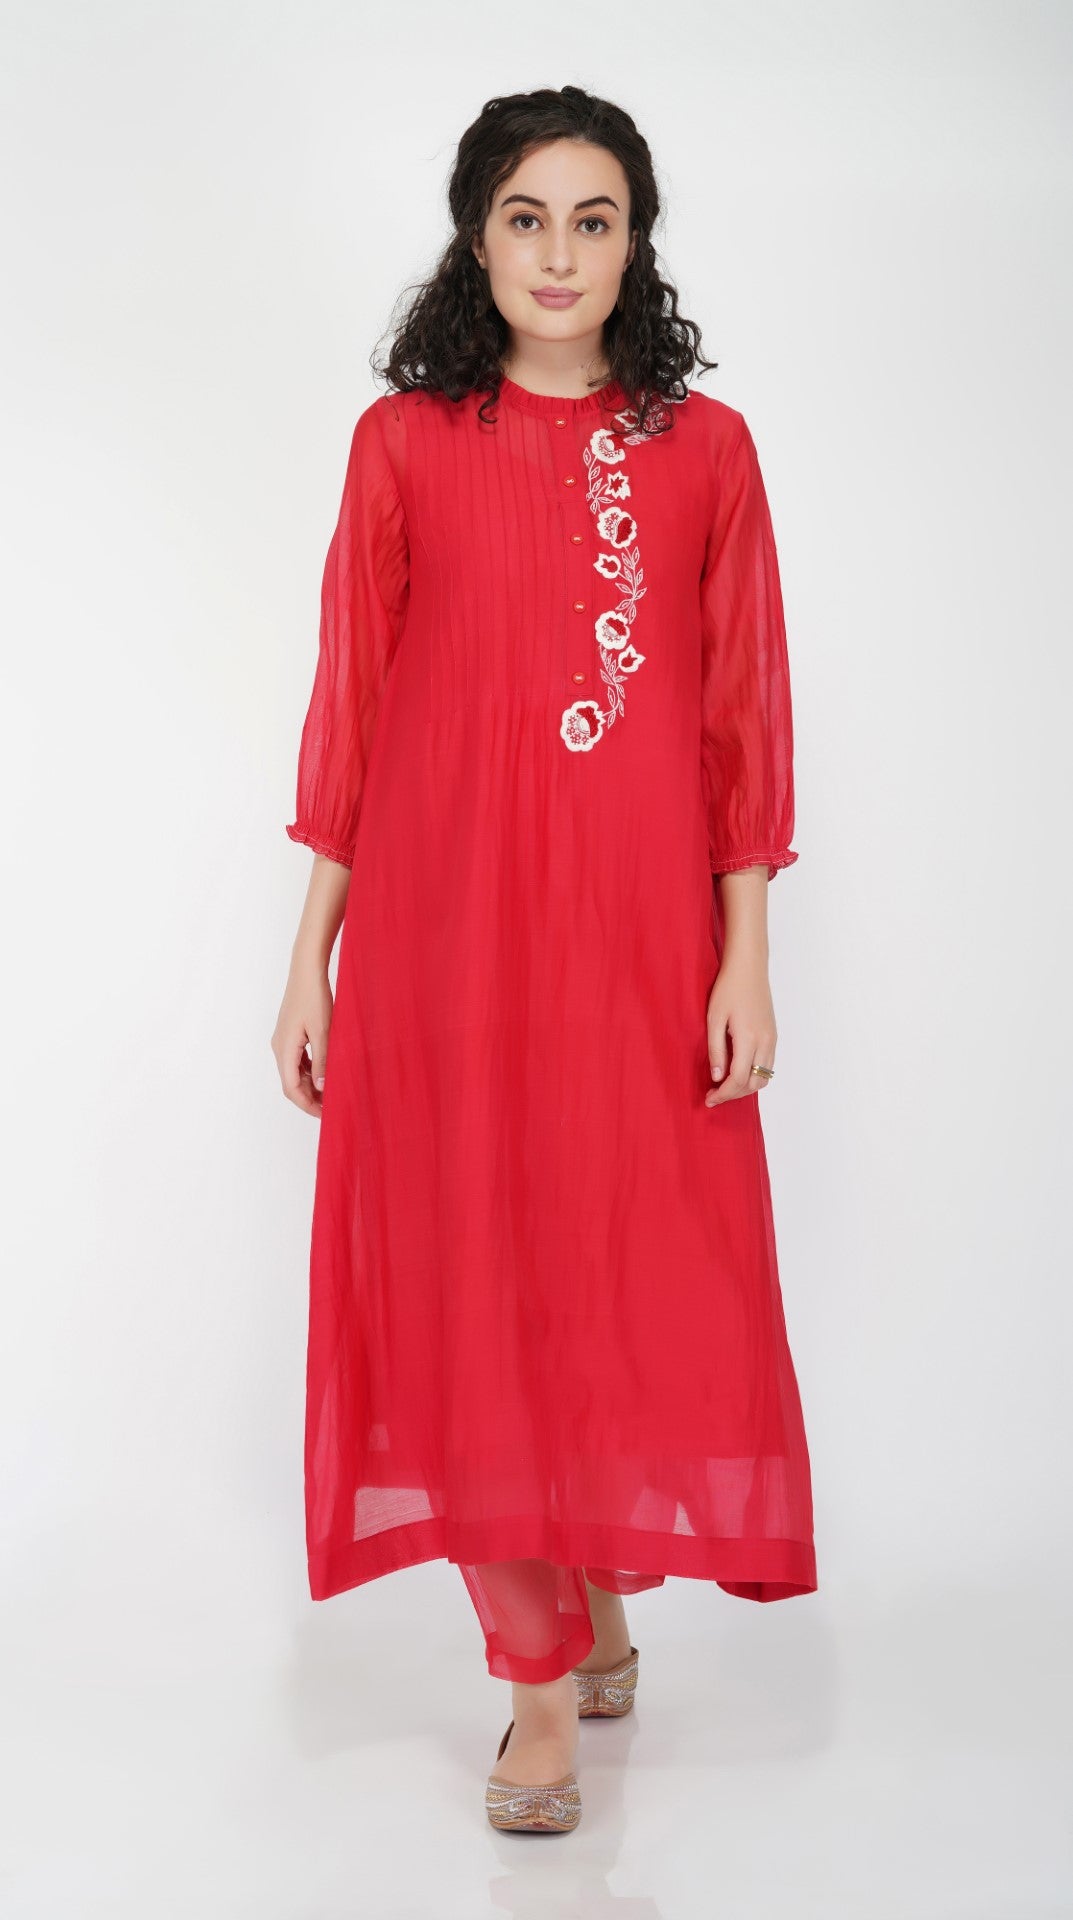 SAAWAN RED CHANDERI FLOWER EMBROIDERY WITH PINTUCKS TUNIC WITH RED COTTON ORGANZA SHEER PANTS